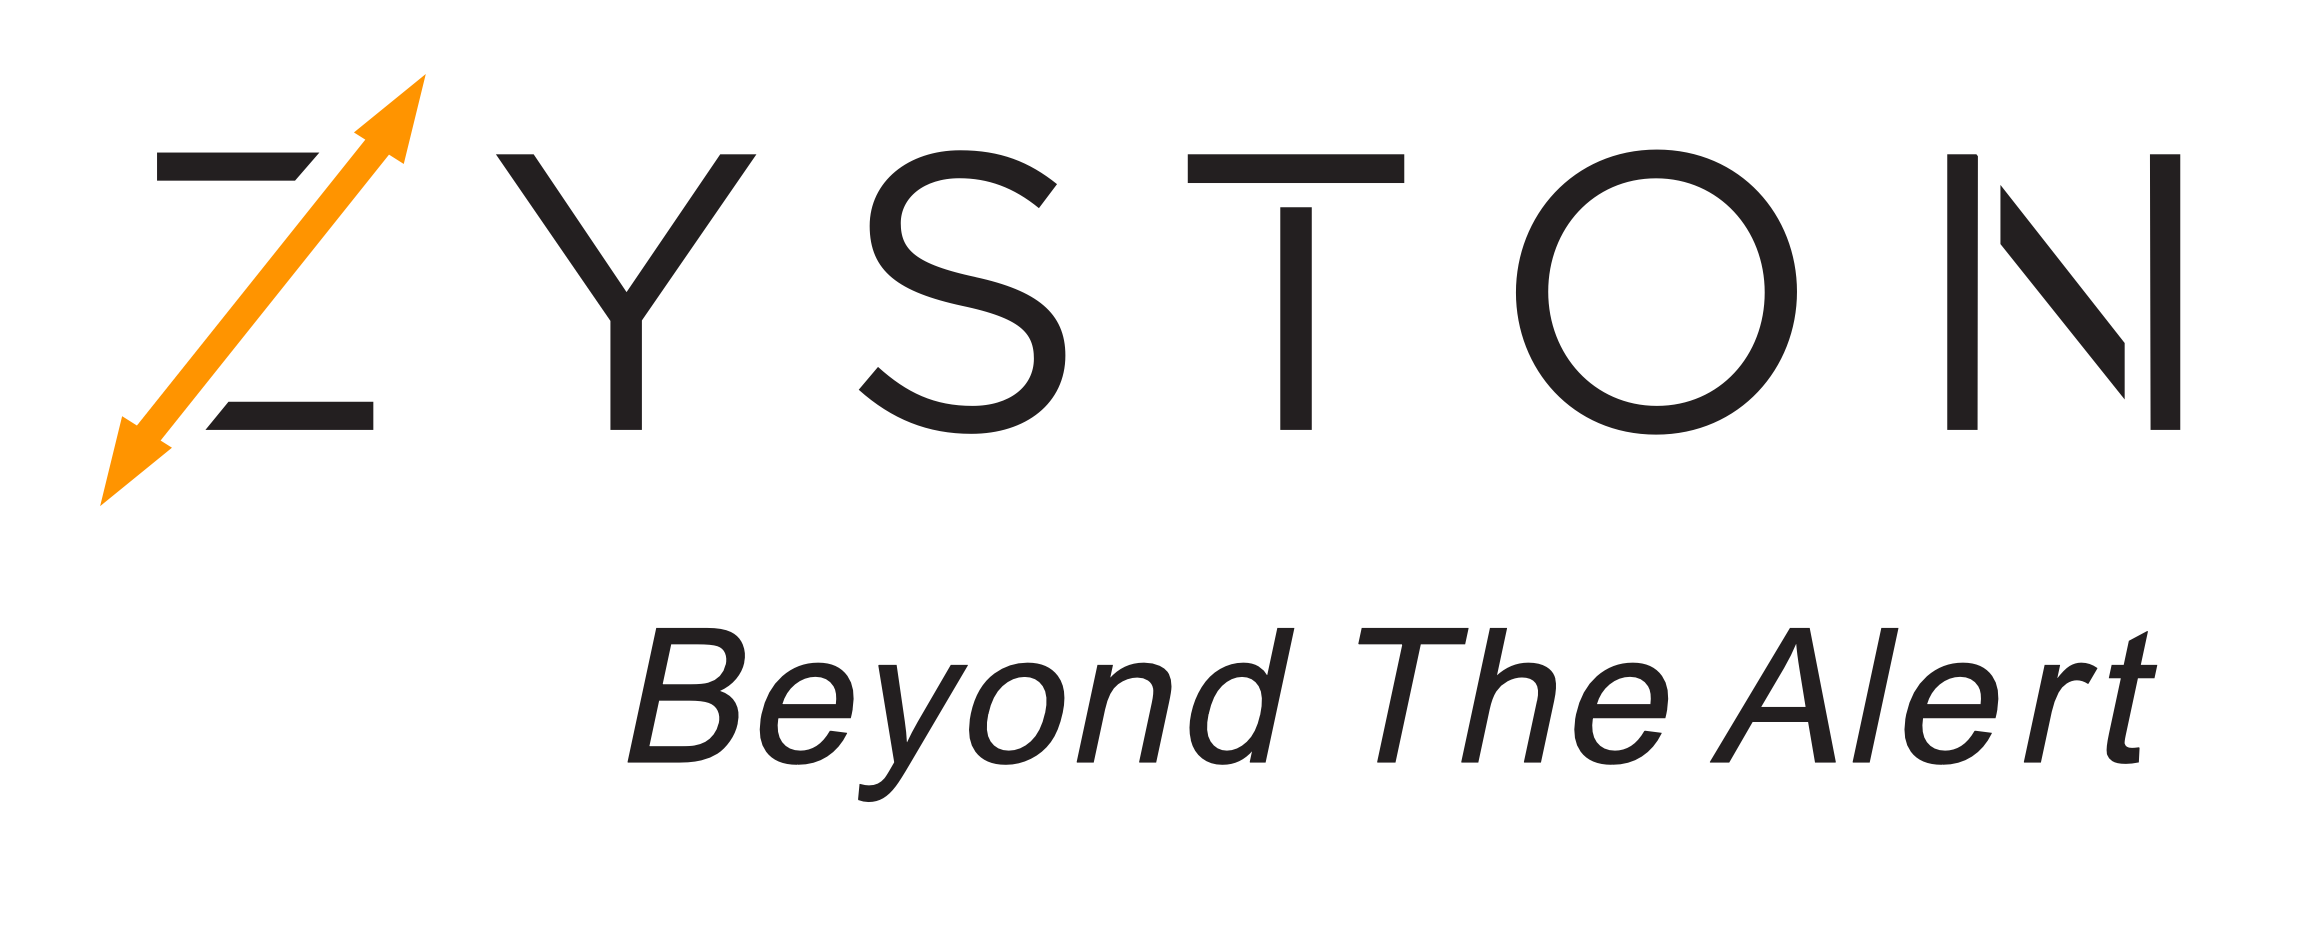 Zyston Cybersecurity MSSP & MDR Solutions - Beyond the Alert